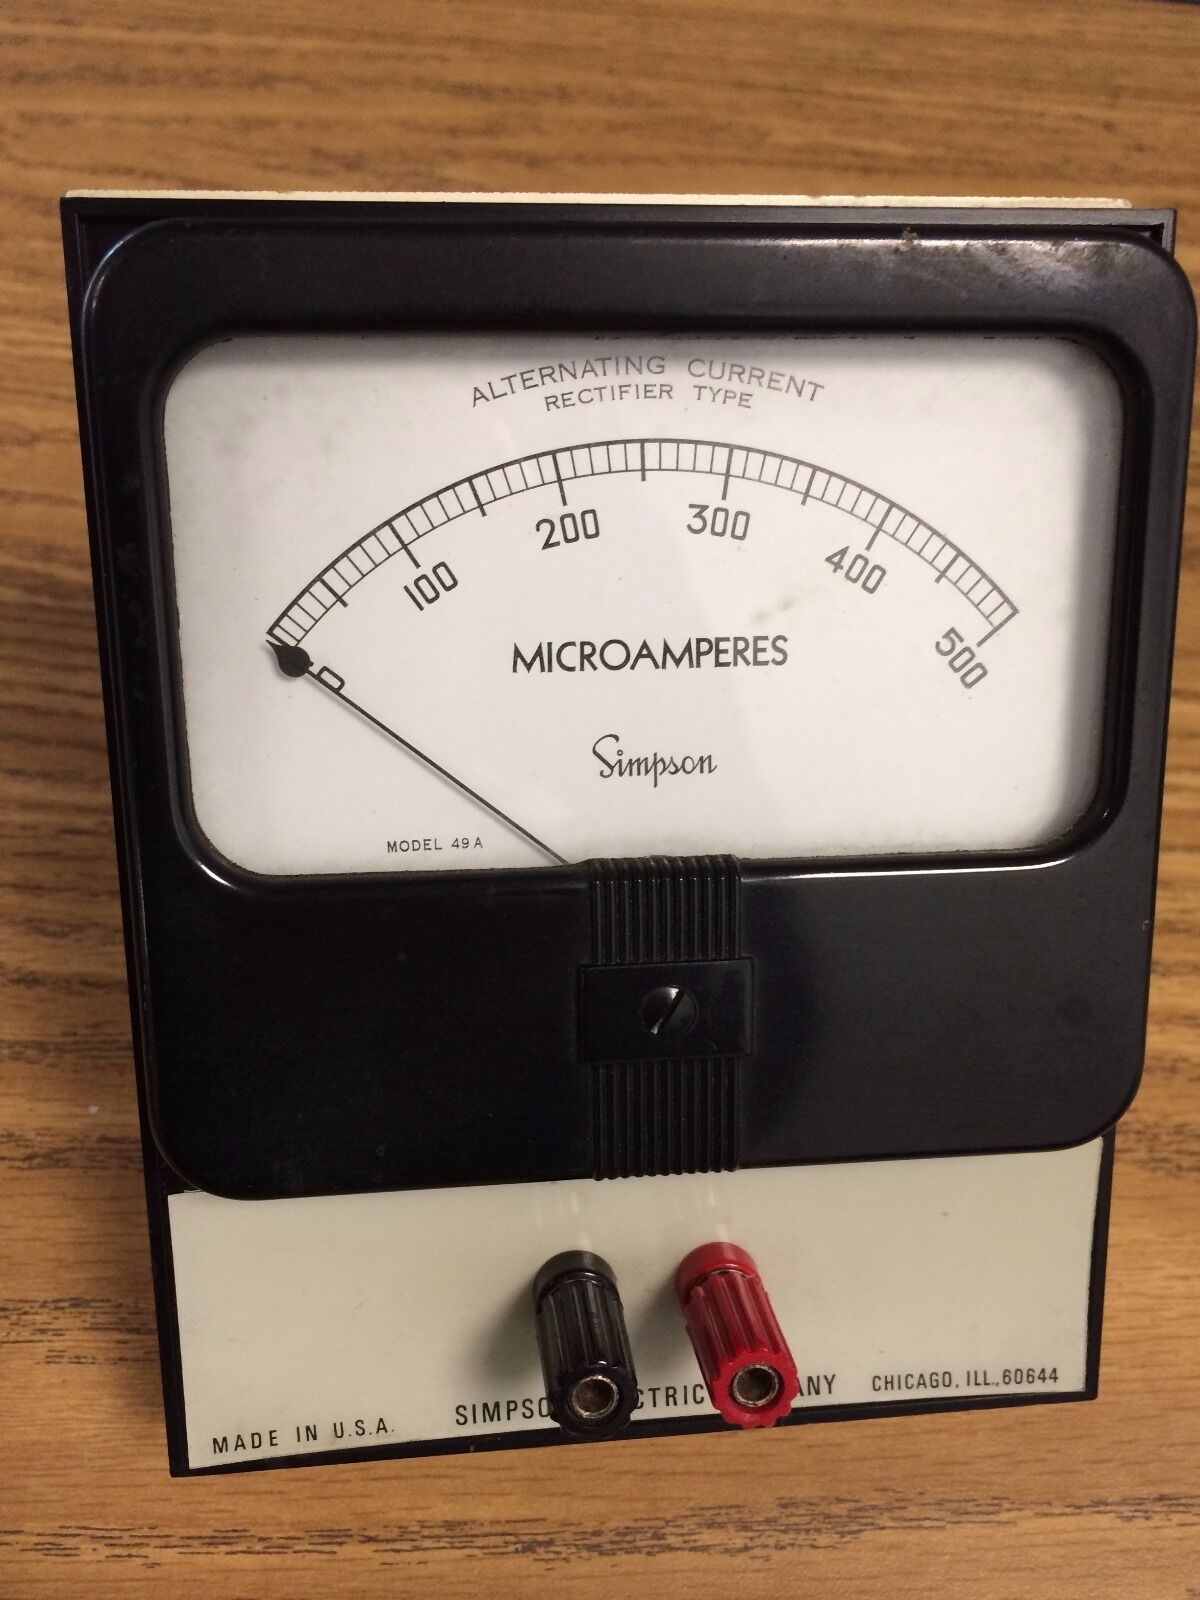 Simpson Electric Microamperes Model 49 A Alternating Current Rectifier Type 